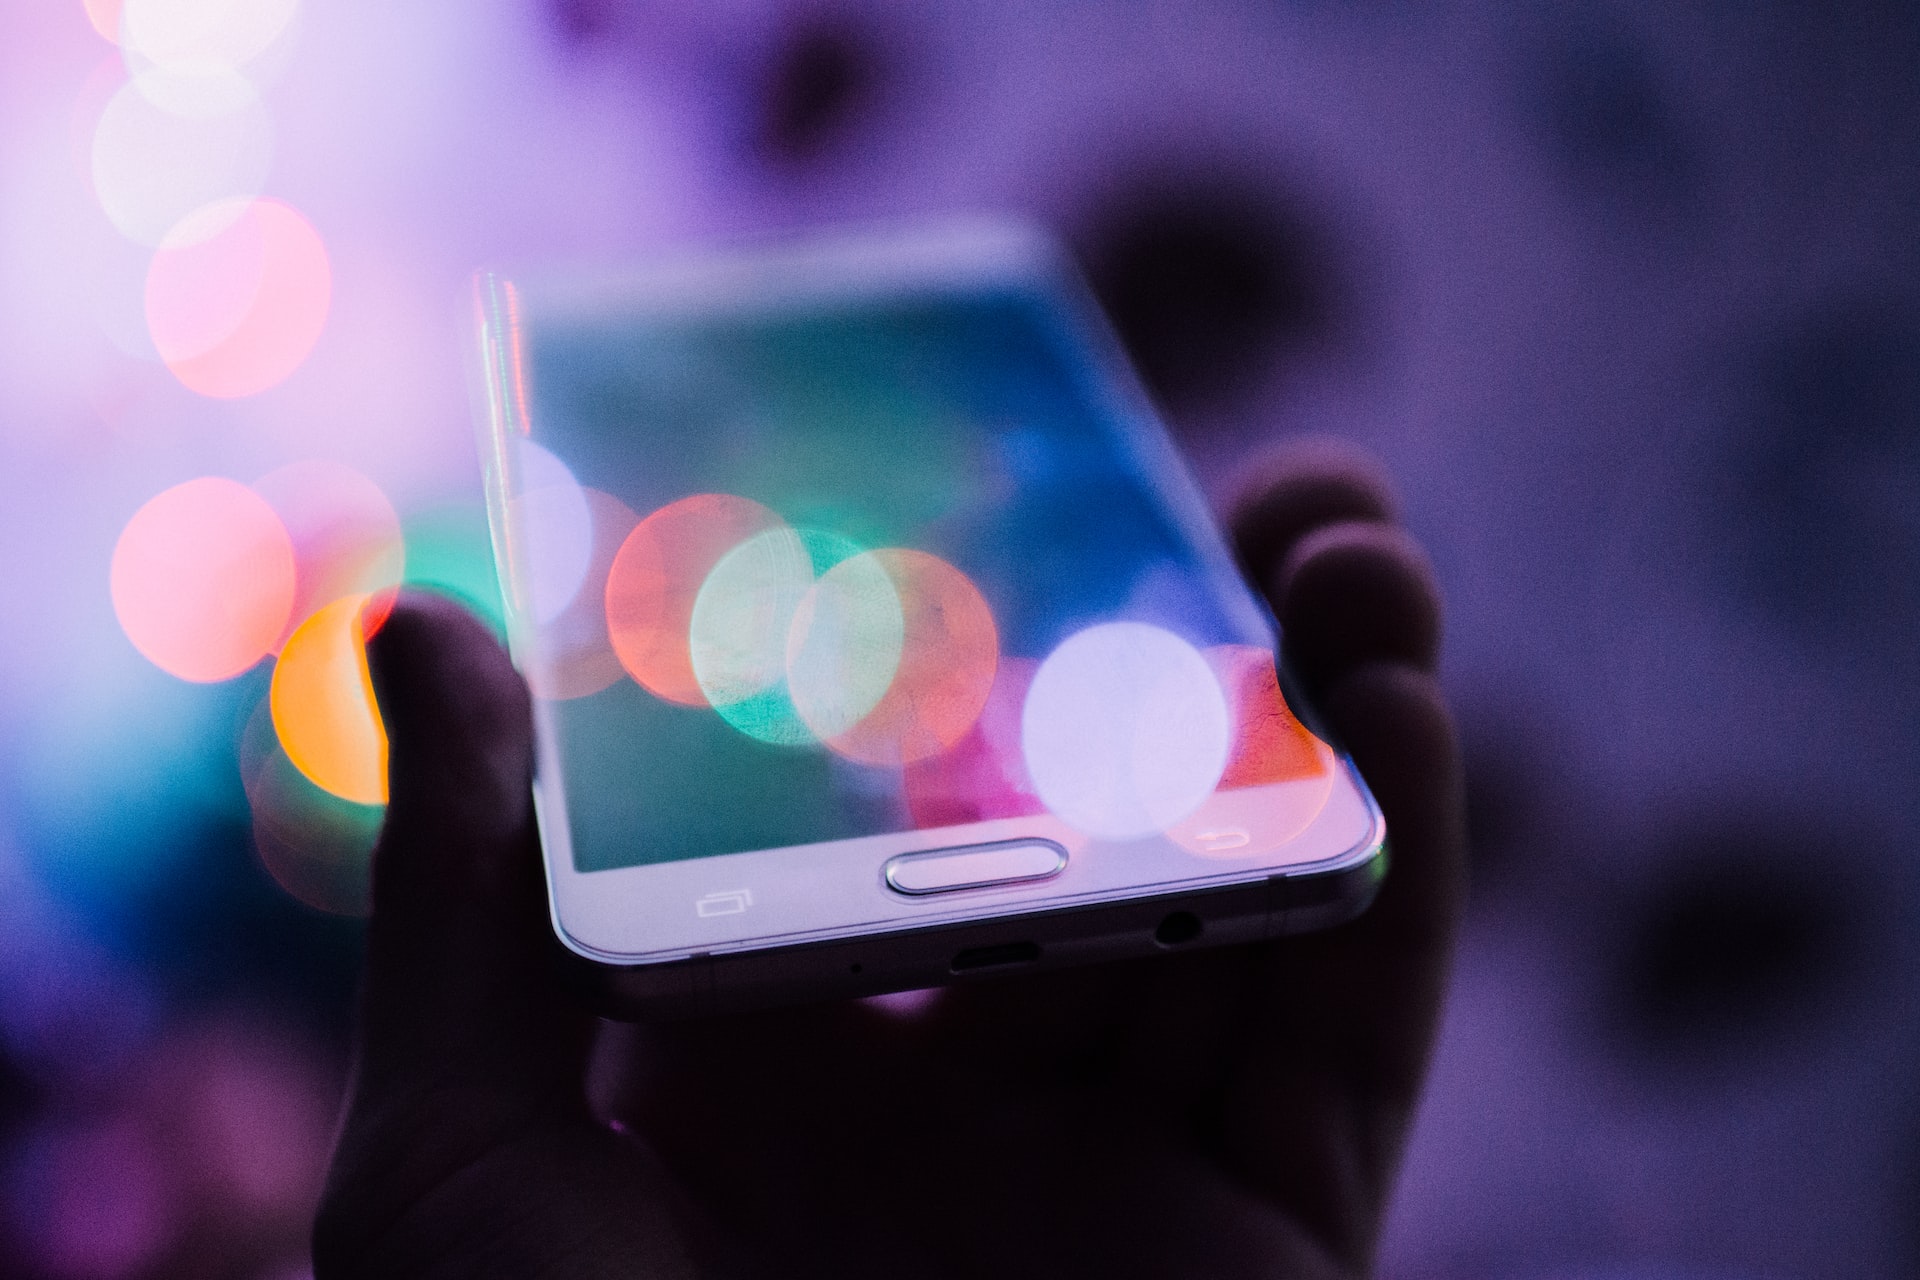 A hand holding a mobile phone with colorful lights shining across its screen.